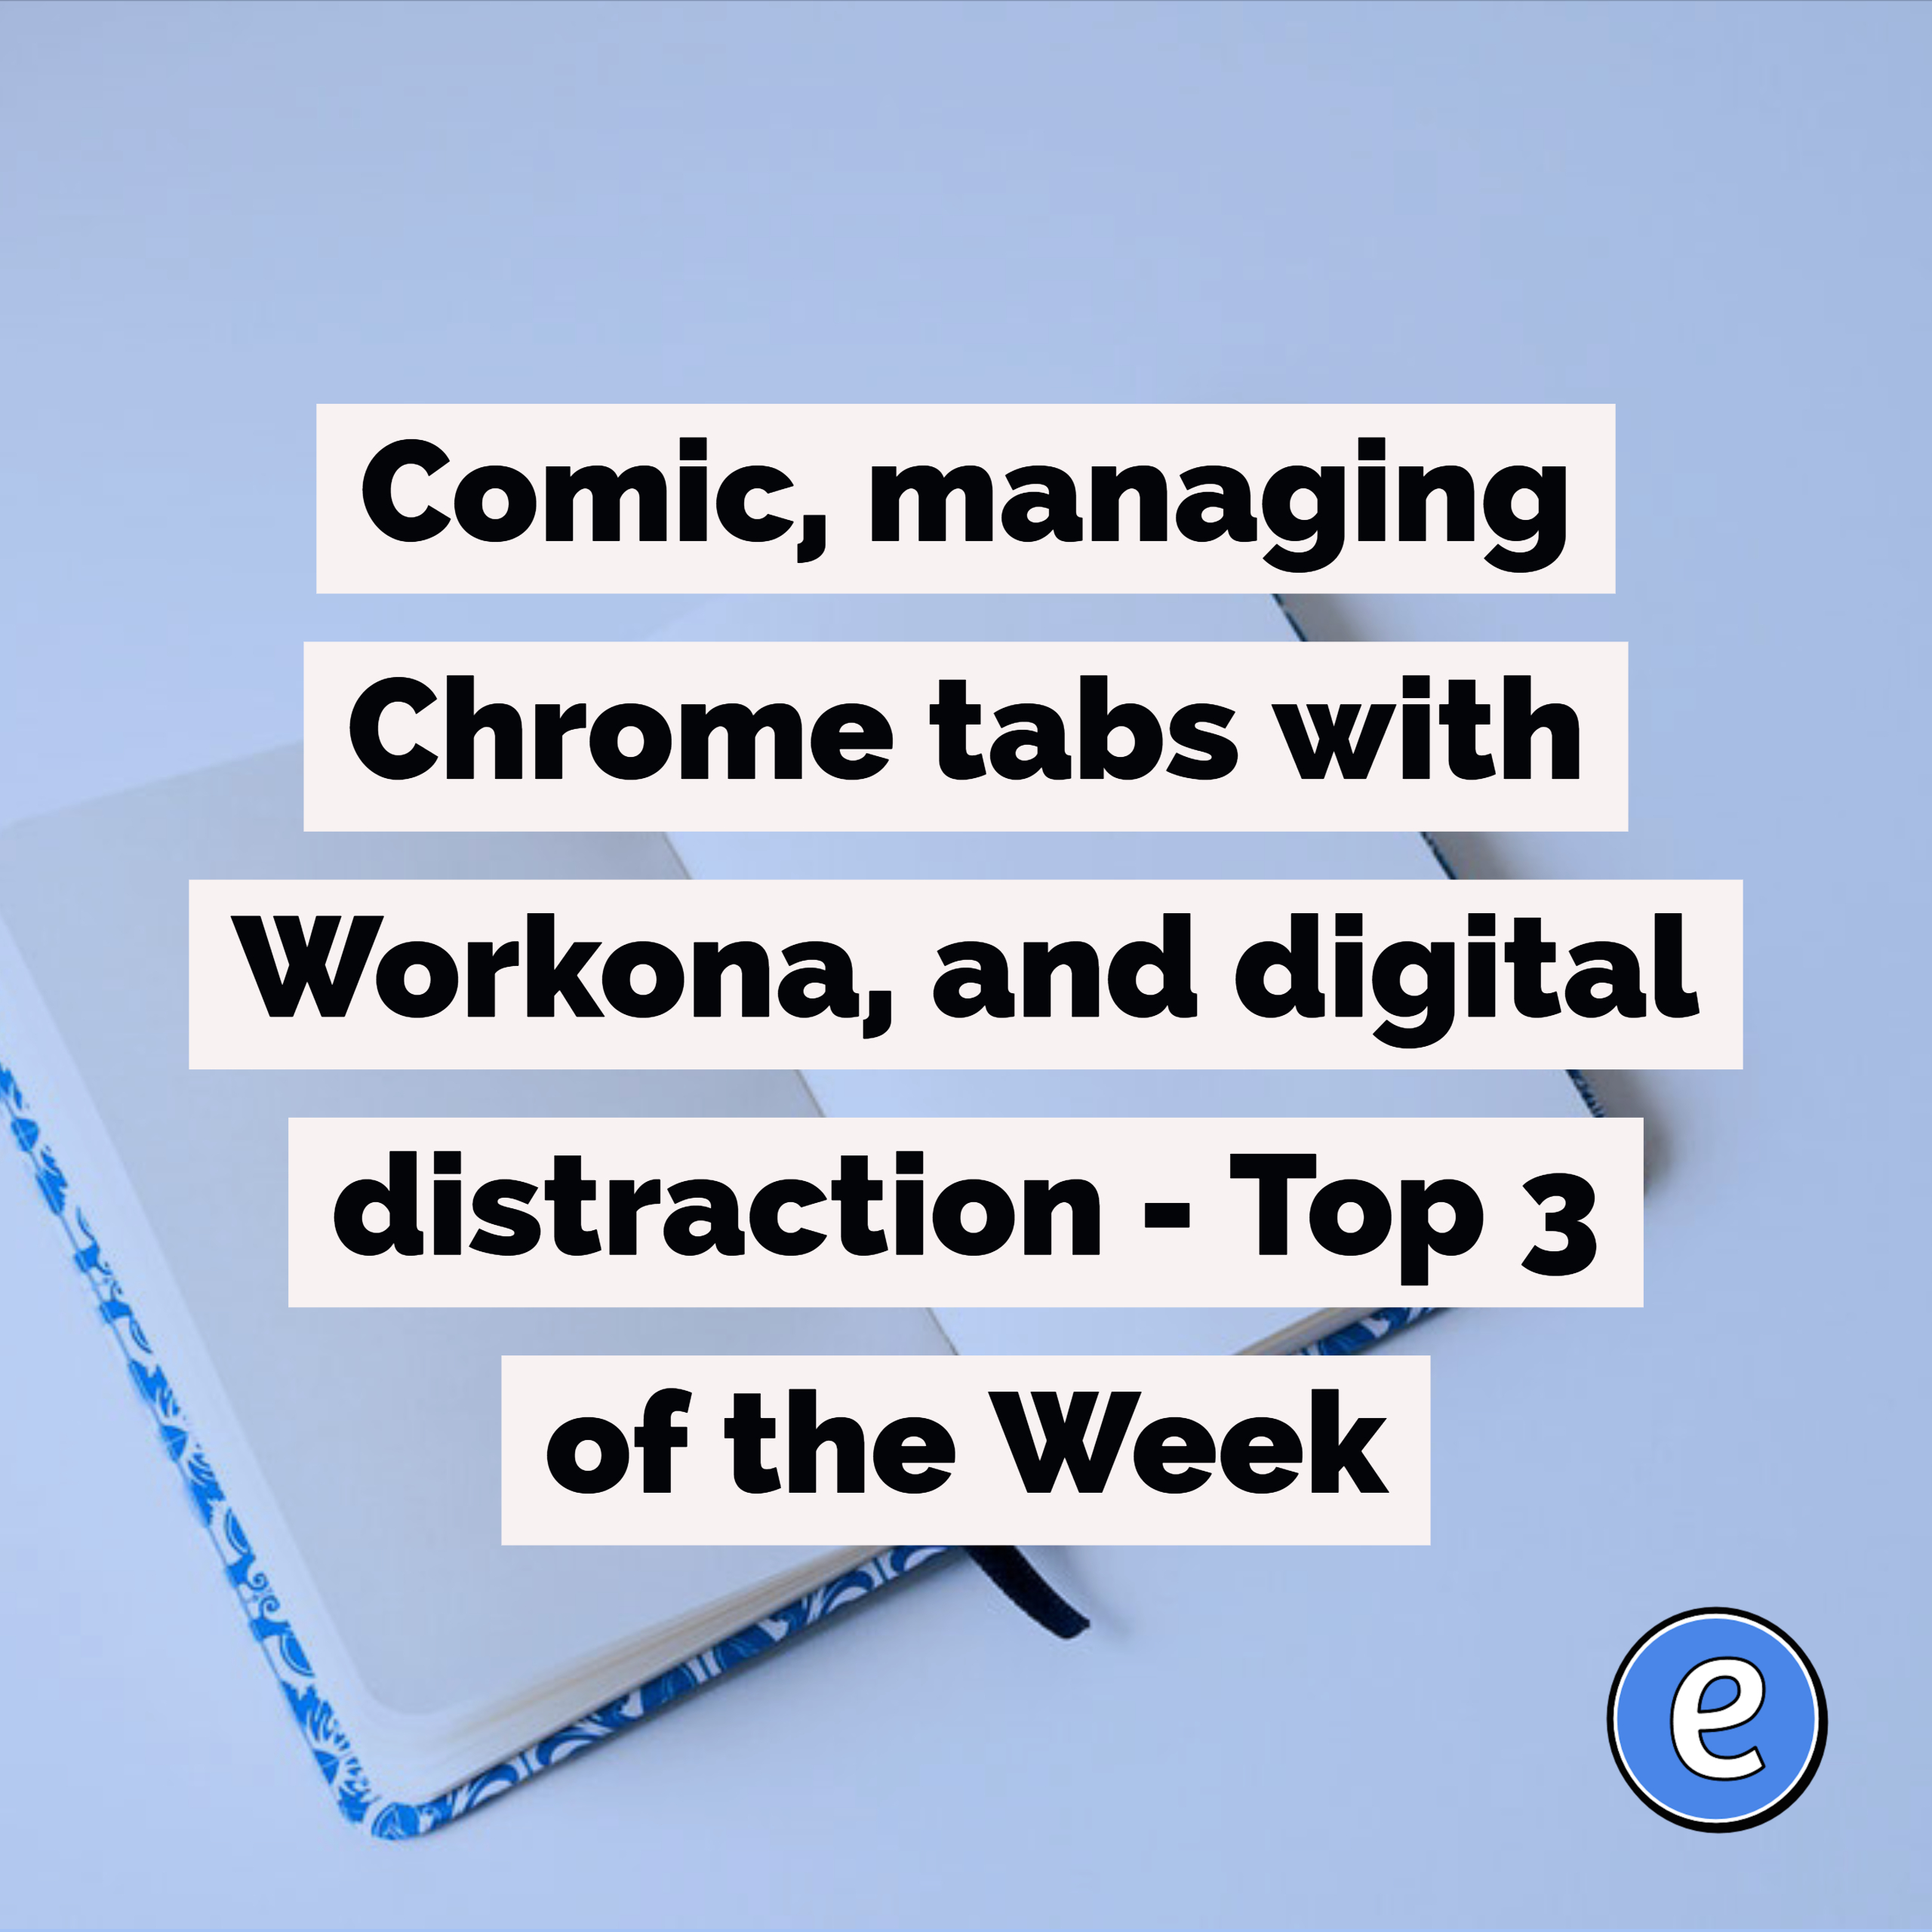 Comic, managing Chrome tabs with Workona, and digital distraction – Top 3 of the Week